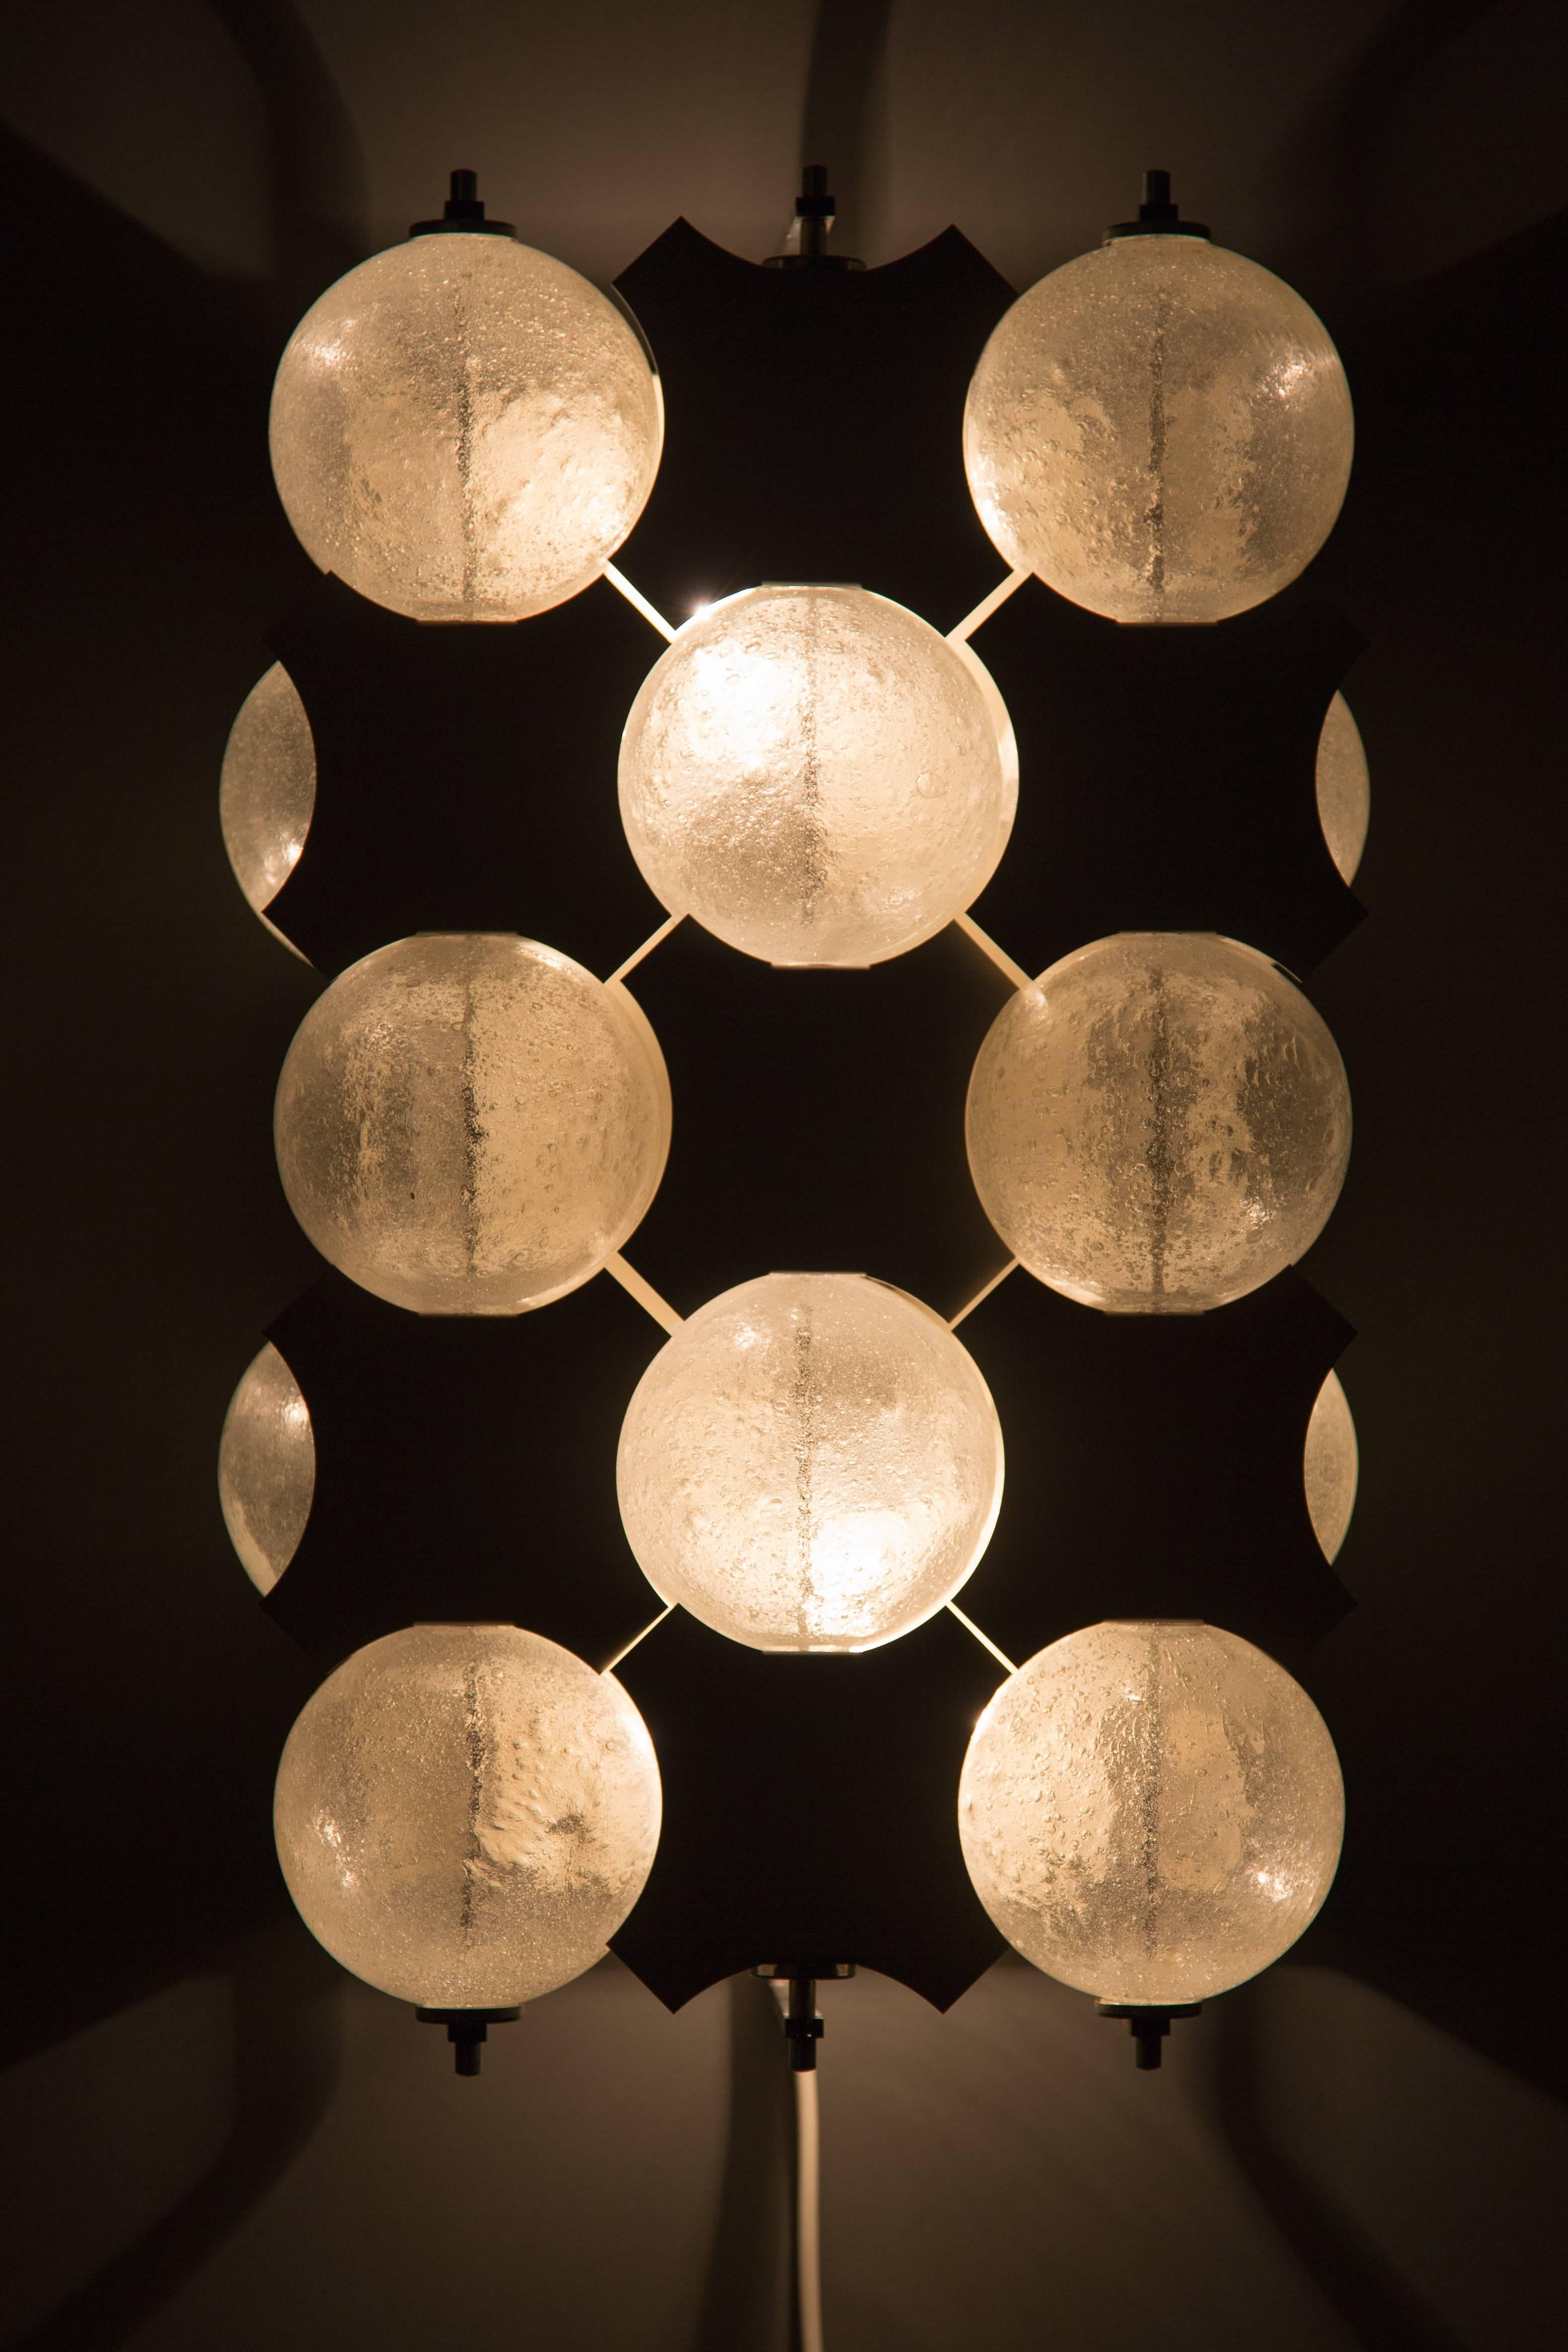 RAAK AMSTERDAM. Fiësta model 1645. Wall lamp of Dutch company Raak Amsterdam. The lamp has glass balls and aluminium reflectors. The aluminium parts can be moved to create a different effect at the light. The bulbs are behind the glass balls. 